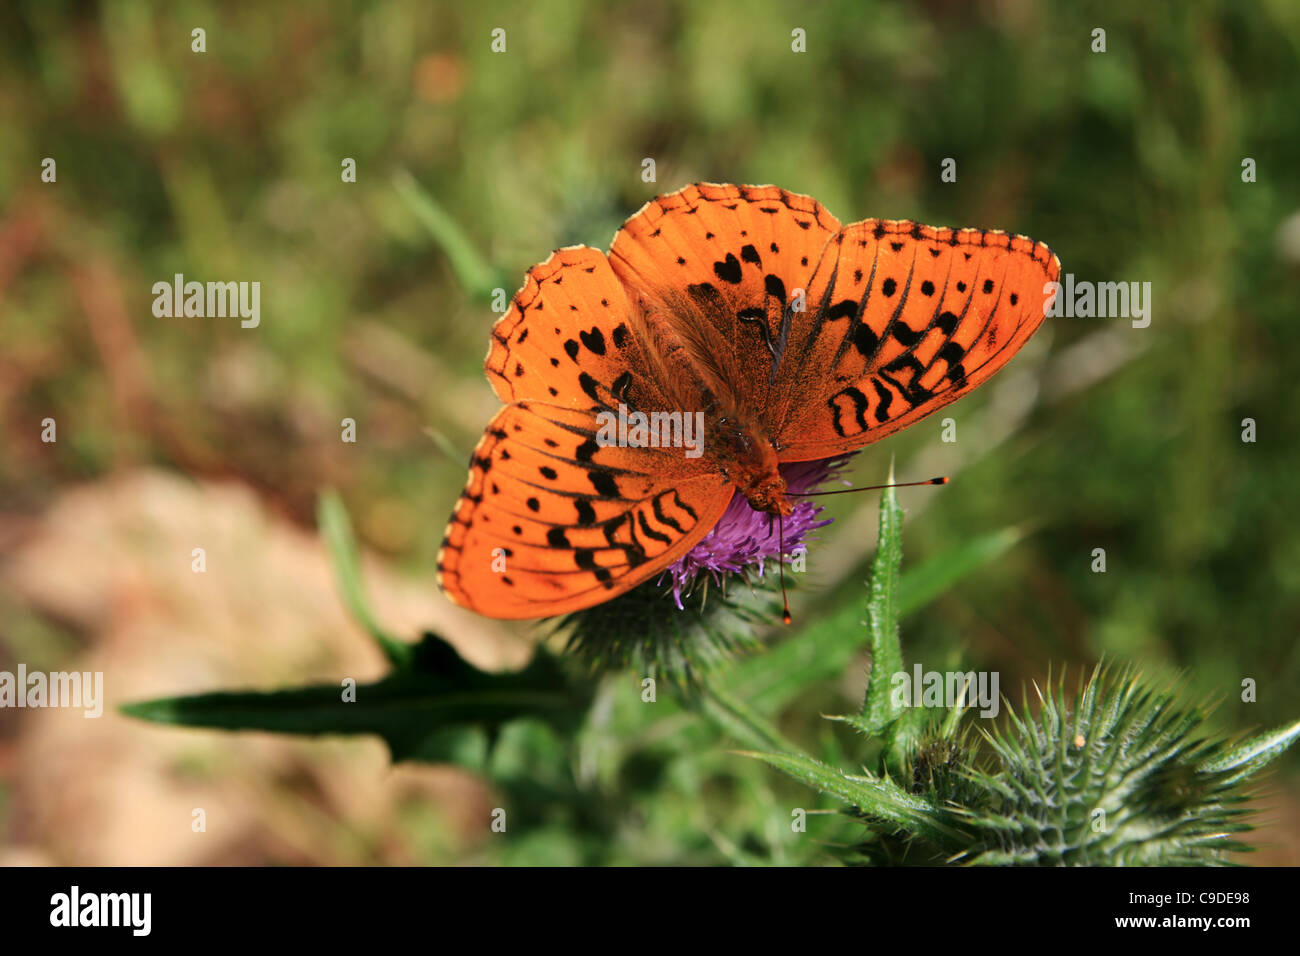 orange great spangled fritillary butterfly (Speyeria cybele) on a thistle flower Stock Photo